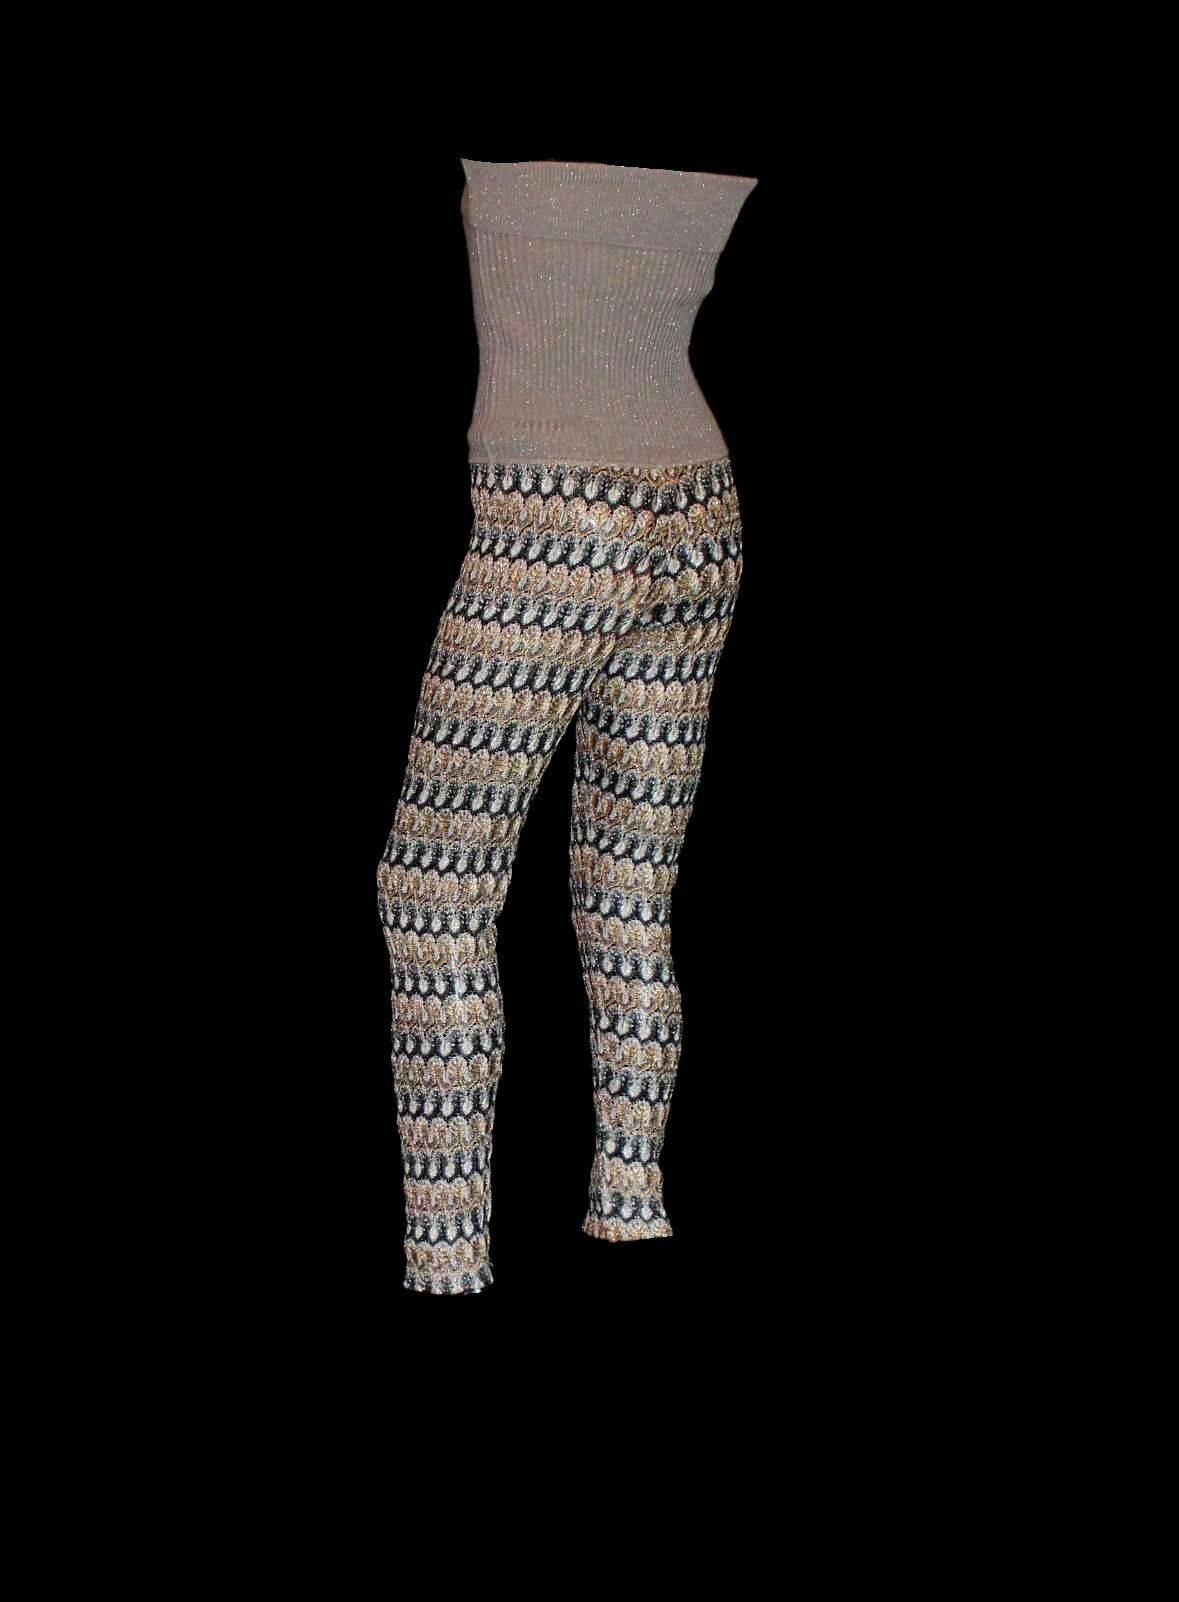 Beautiful MISSONI jumpsuit
Classic signature zigzag crochet knit in lurex metallic
Simply slips on
Bandeau upper part with ribbed structure 
Gorgeous crochet knit legs
Dry Clean only
Made in Italy
Unworn